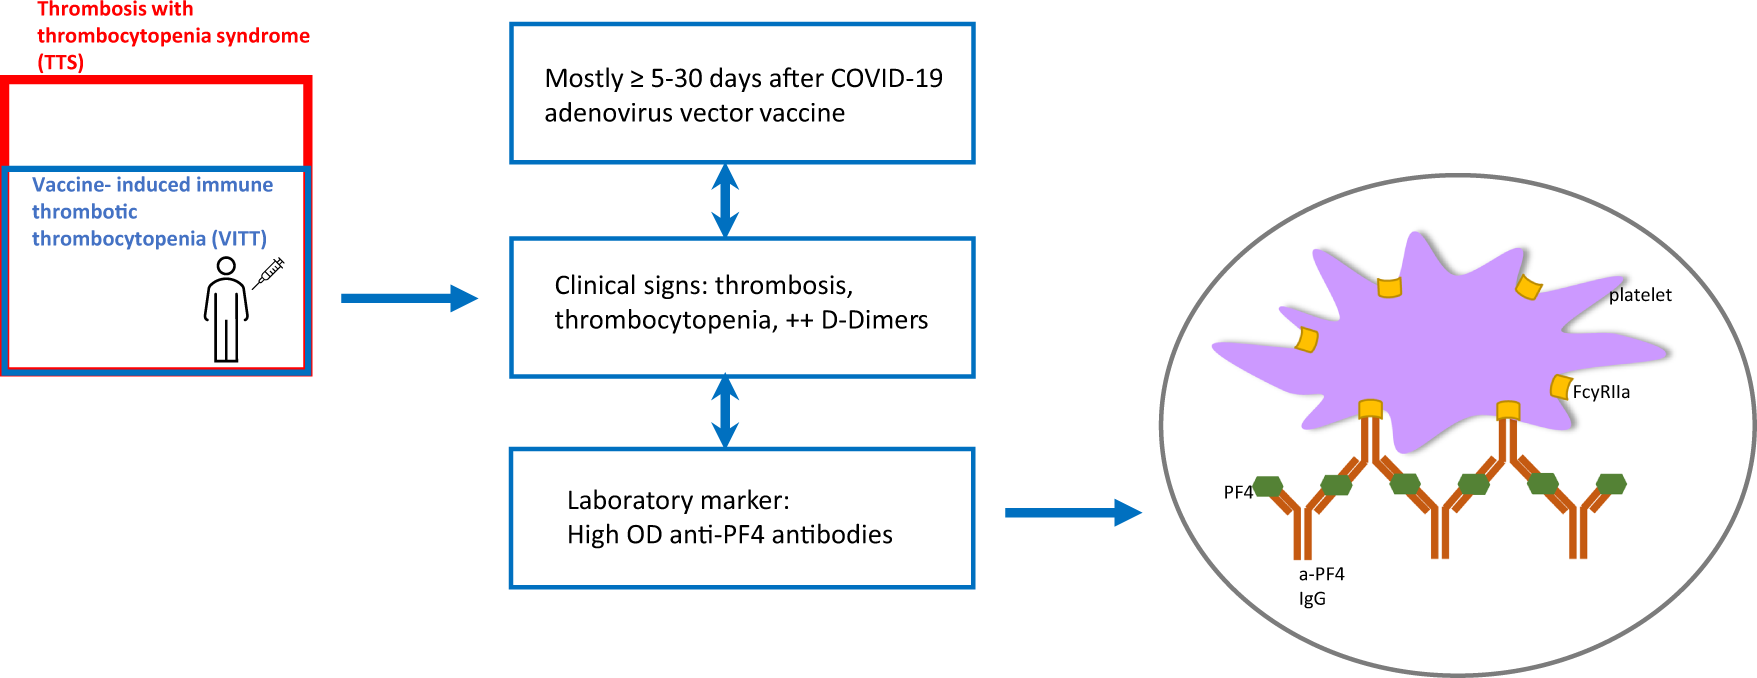 Understanding thrombosis with thrombocytopenia syndrome after COVID-19  vaccination | npj Vaccines